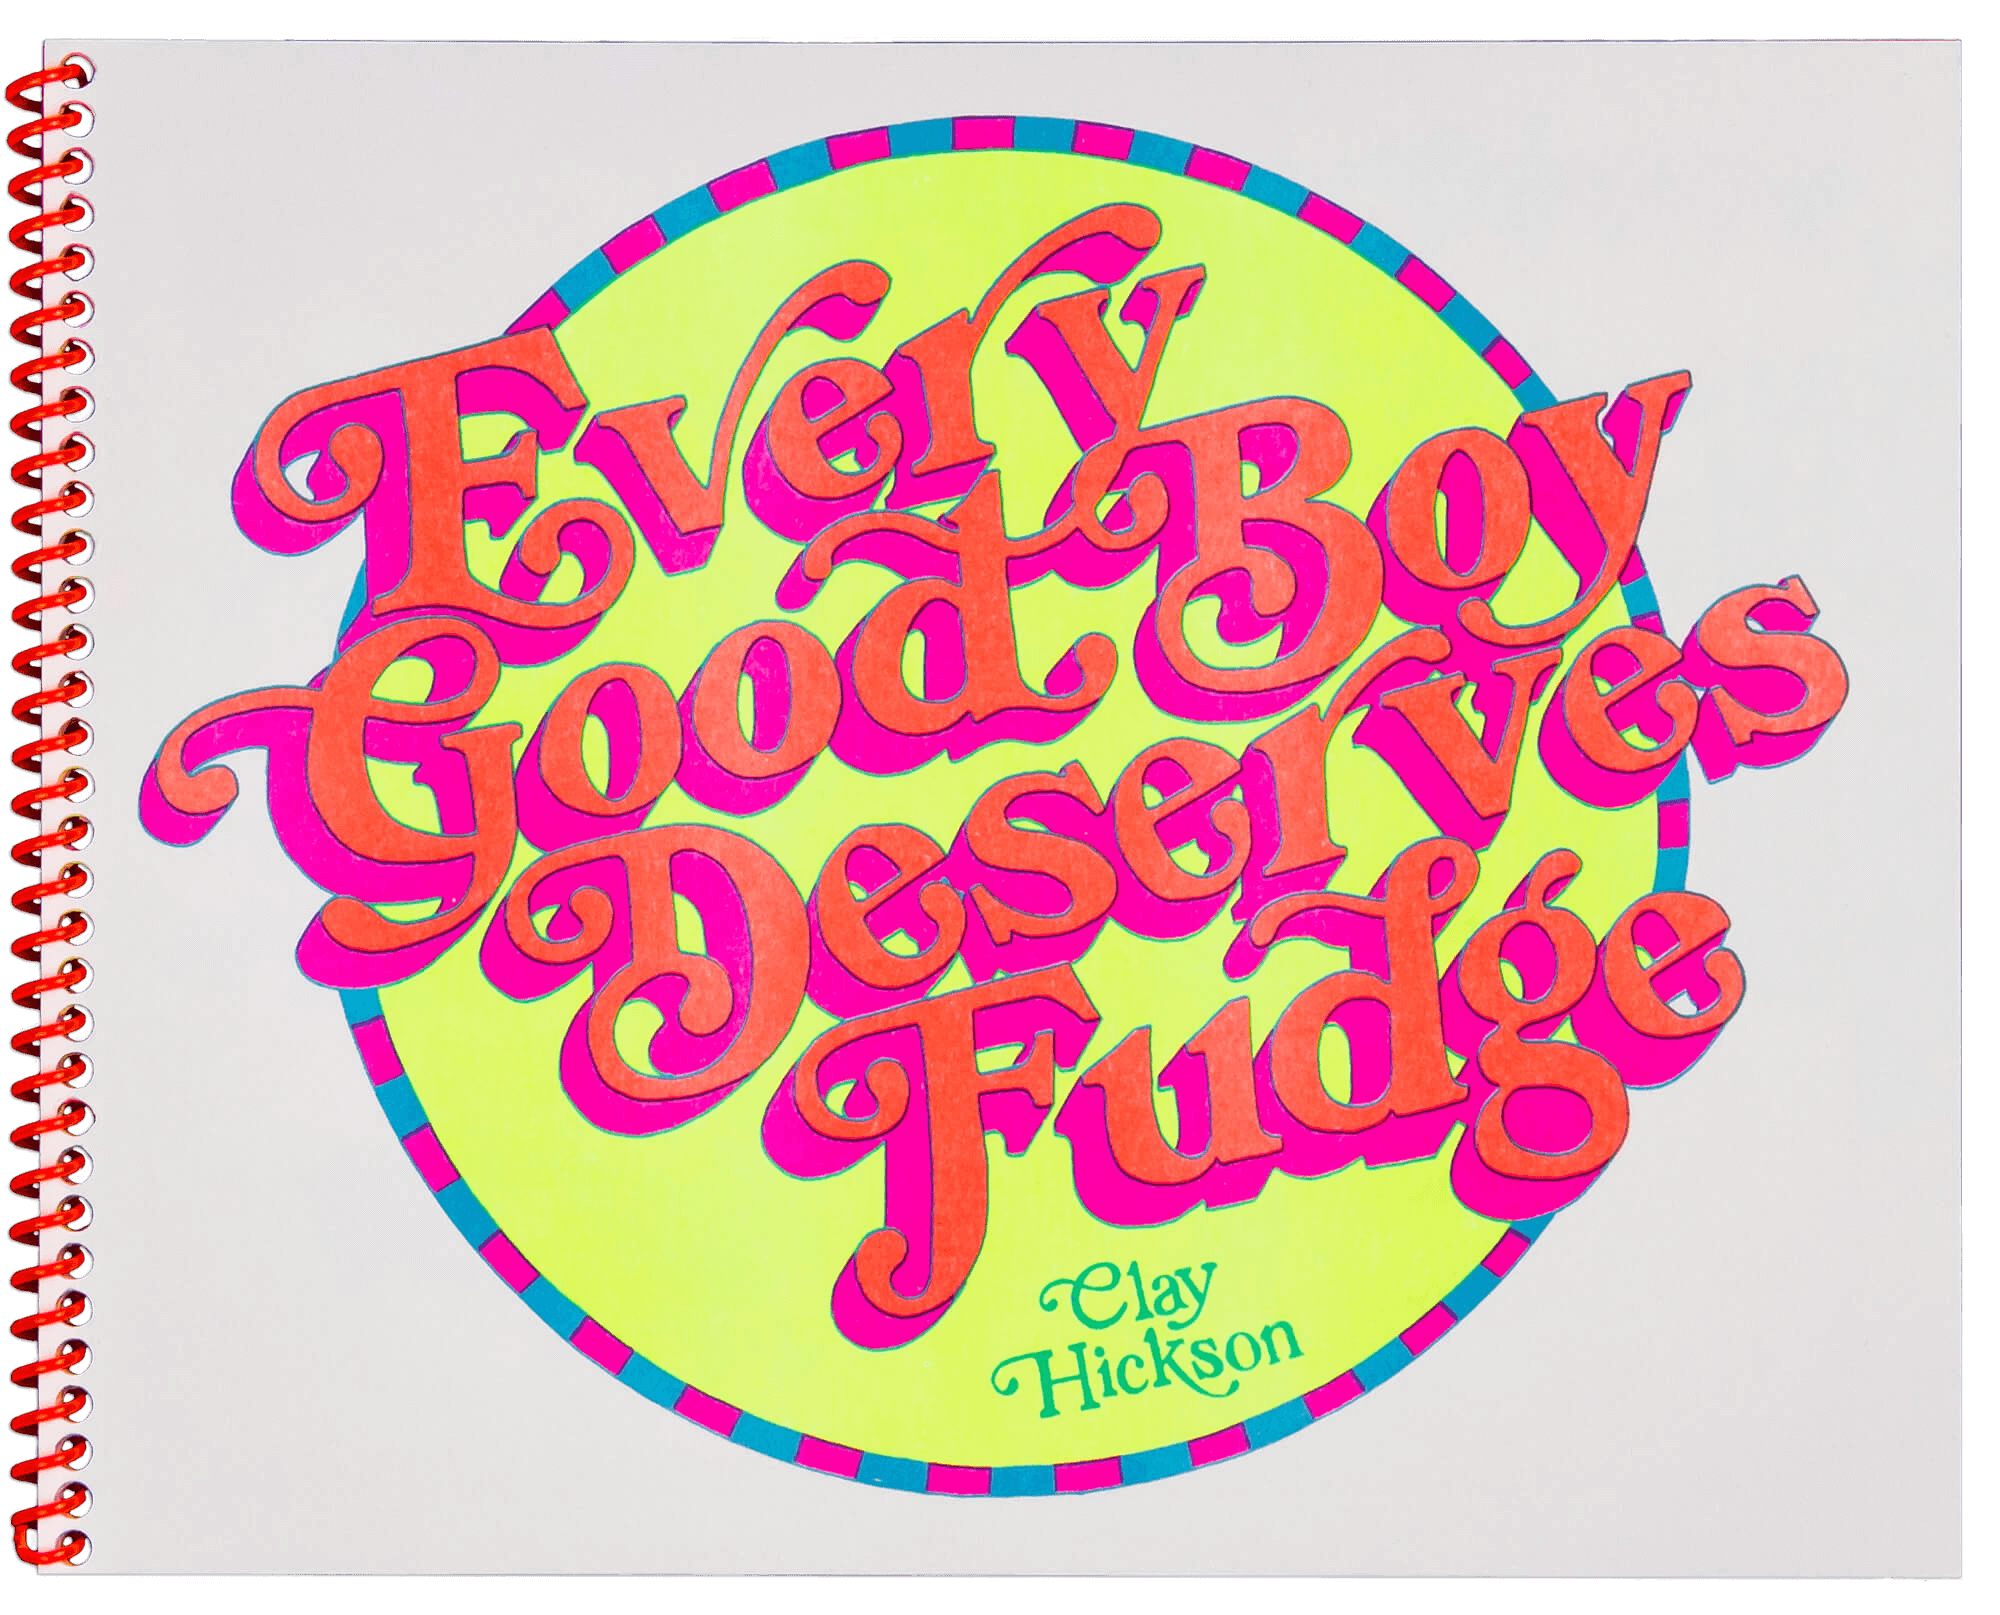 Excerpt of Every Good Boy Deserves Fudge by Clay Hickson